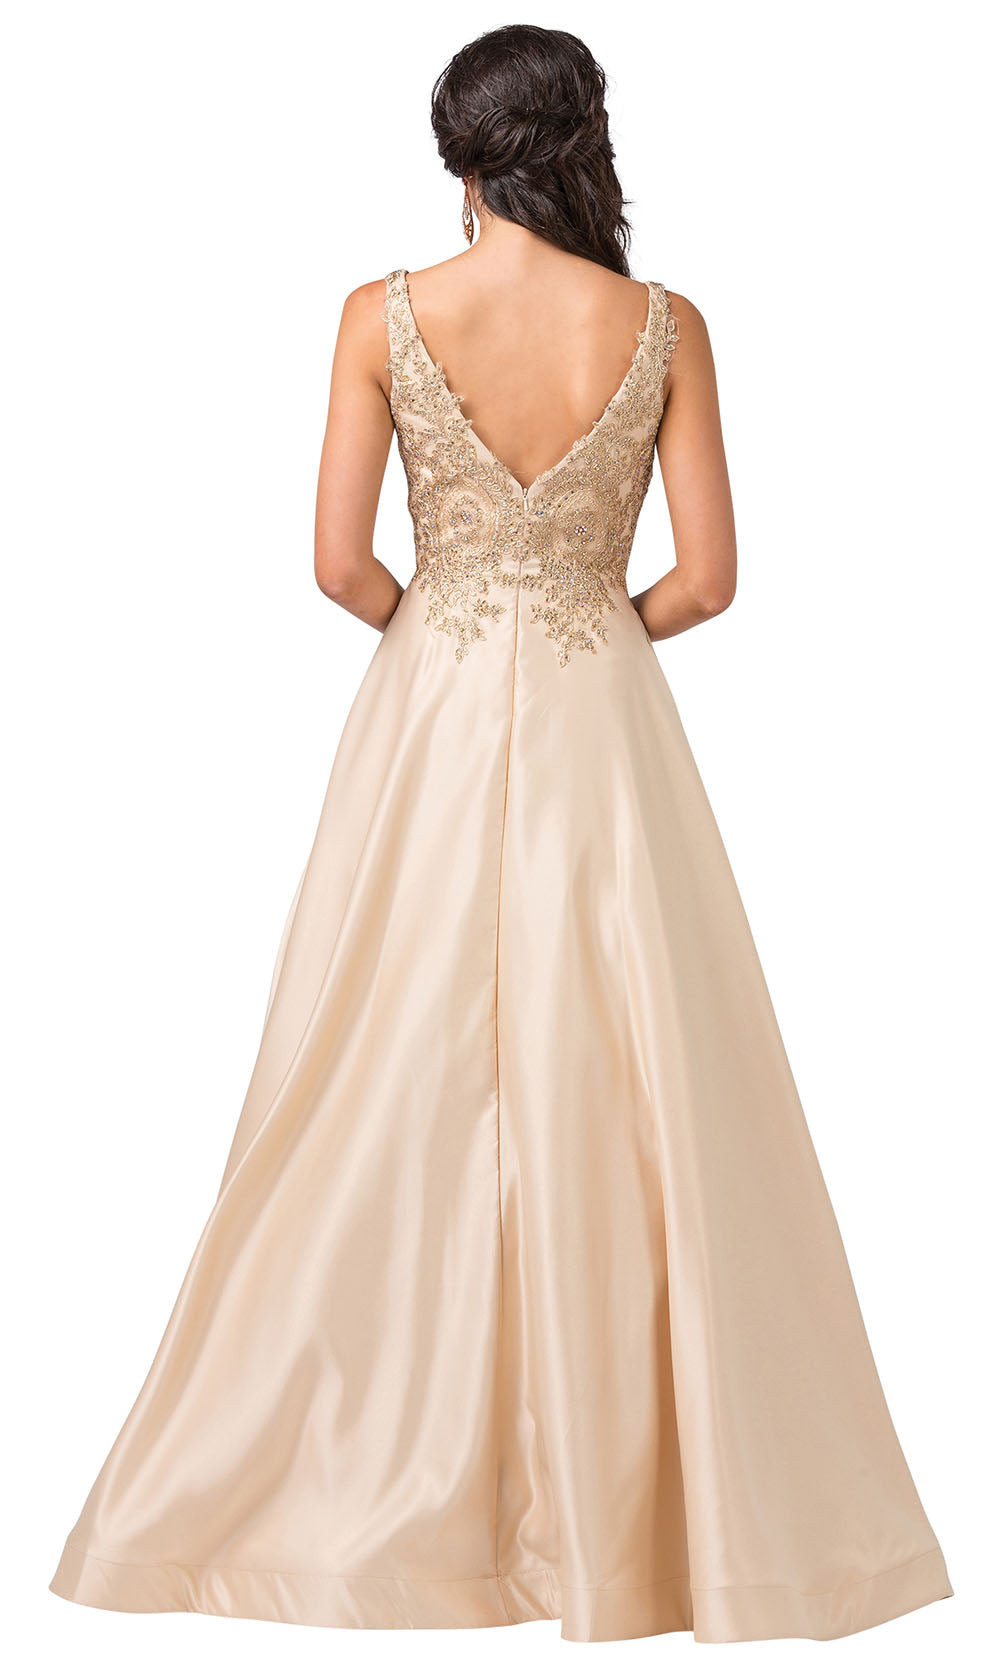 Dancing Queen - 2533 Embroidered V Neck A-Line Dress In Neutral